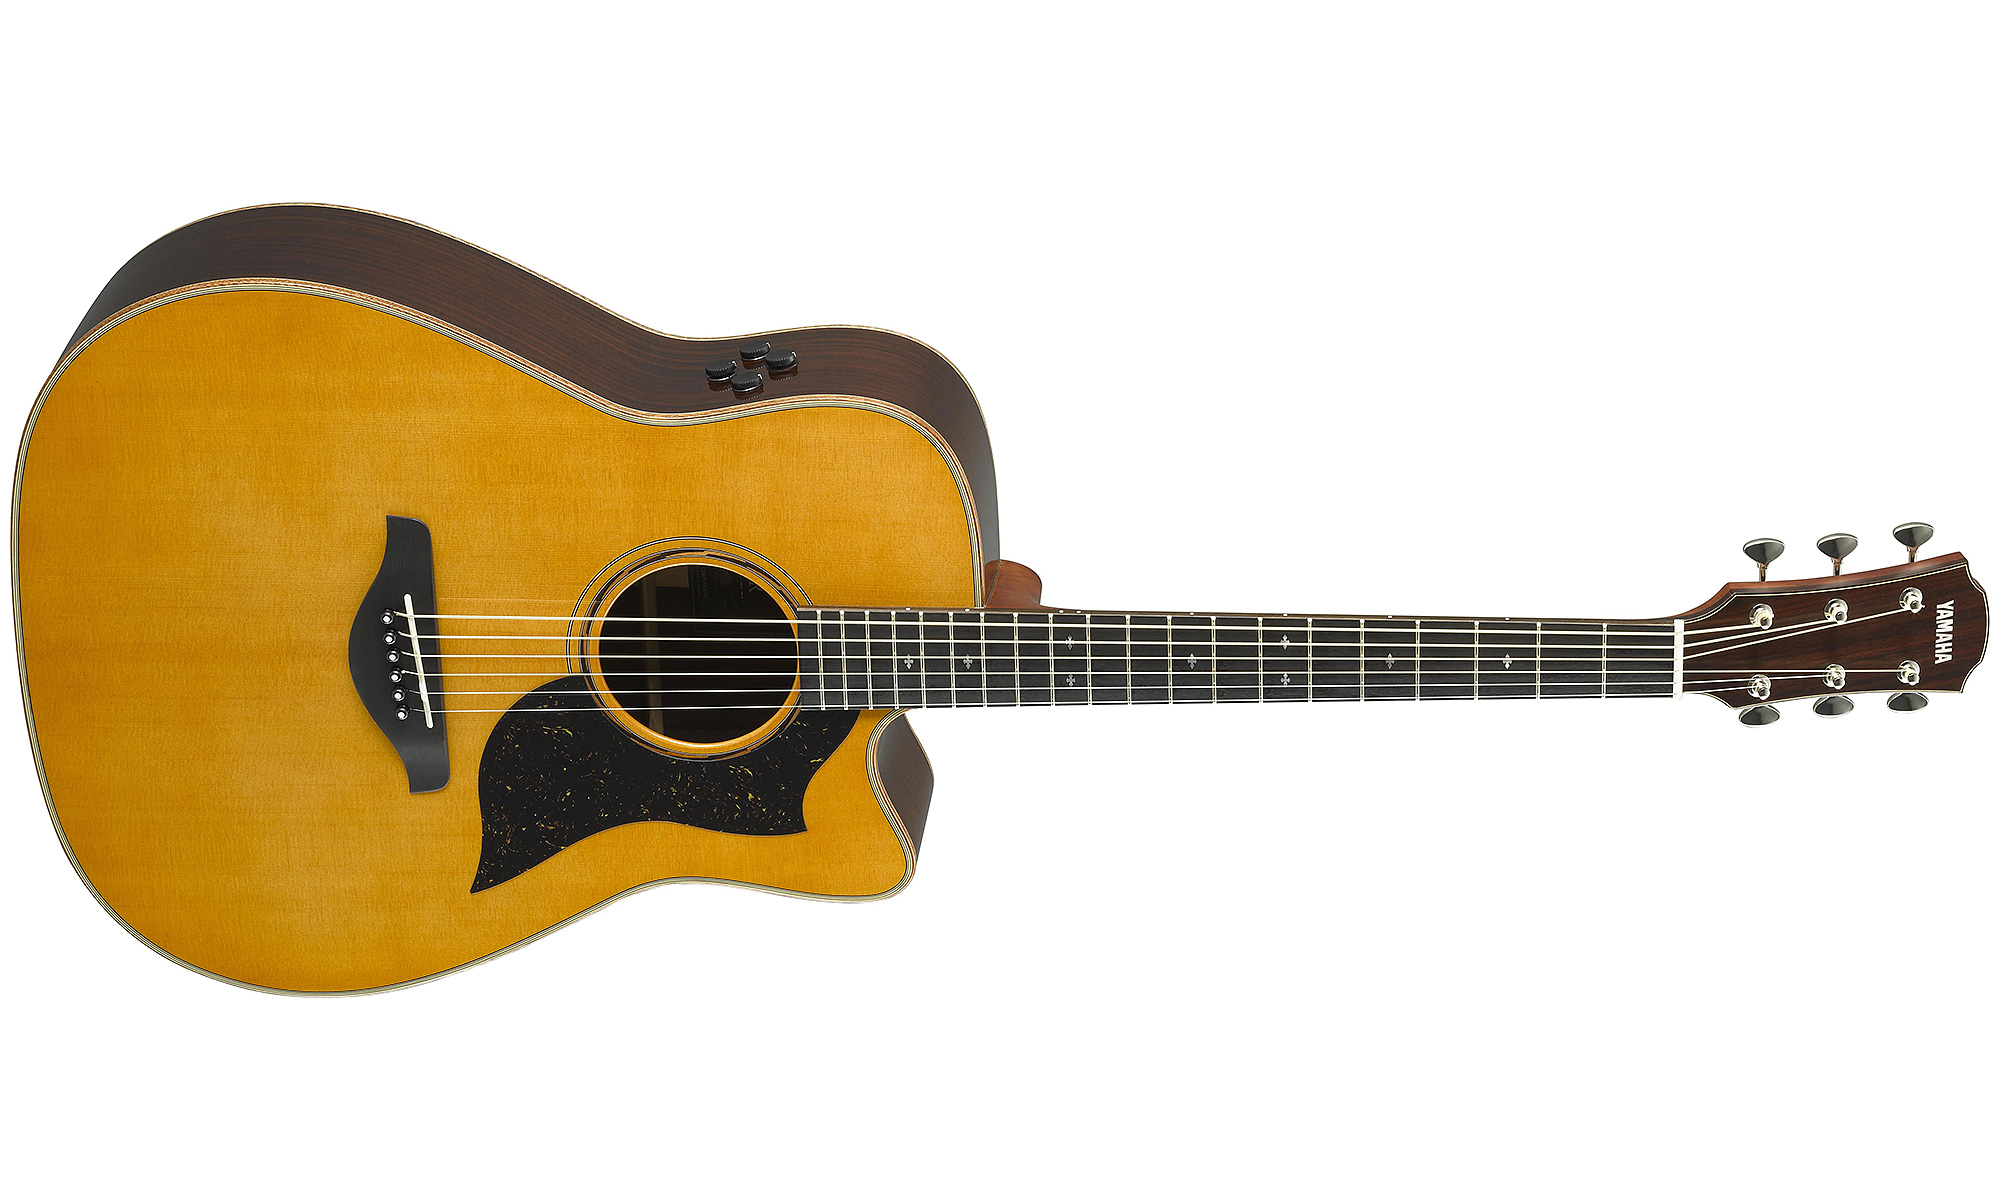 Yamaha A5r Are Vn Dreadnought Cw Epicea Palissandre Eb - Vintage Natural - Electro acoustic guitar - Variation 1